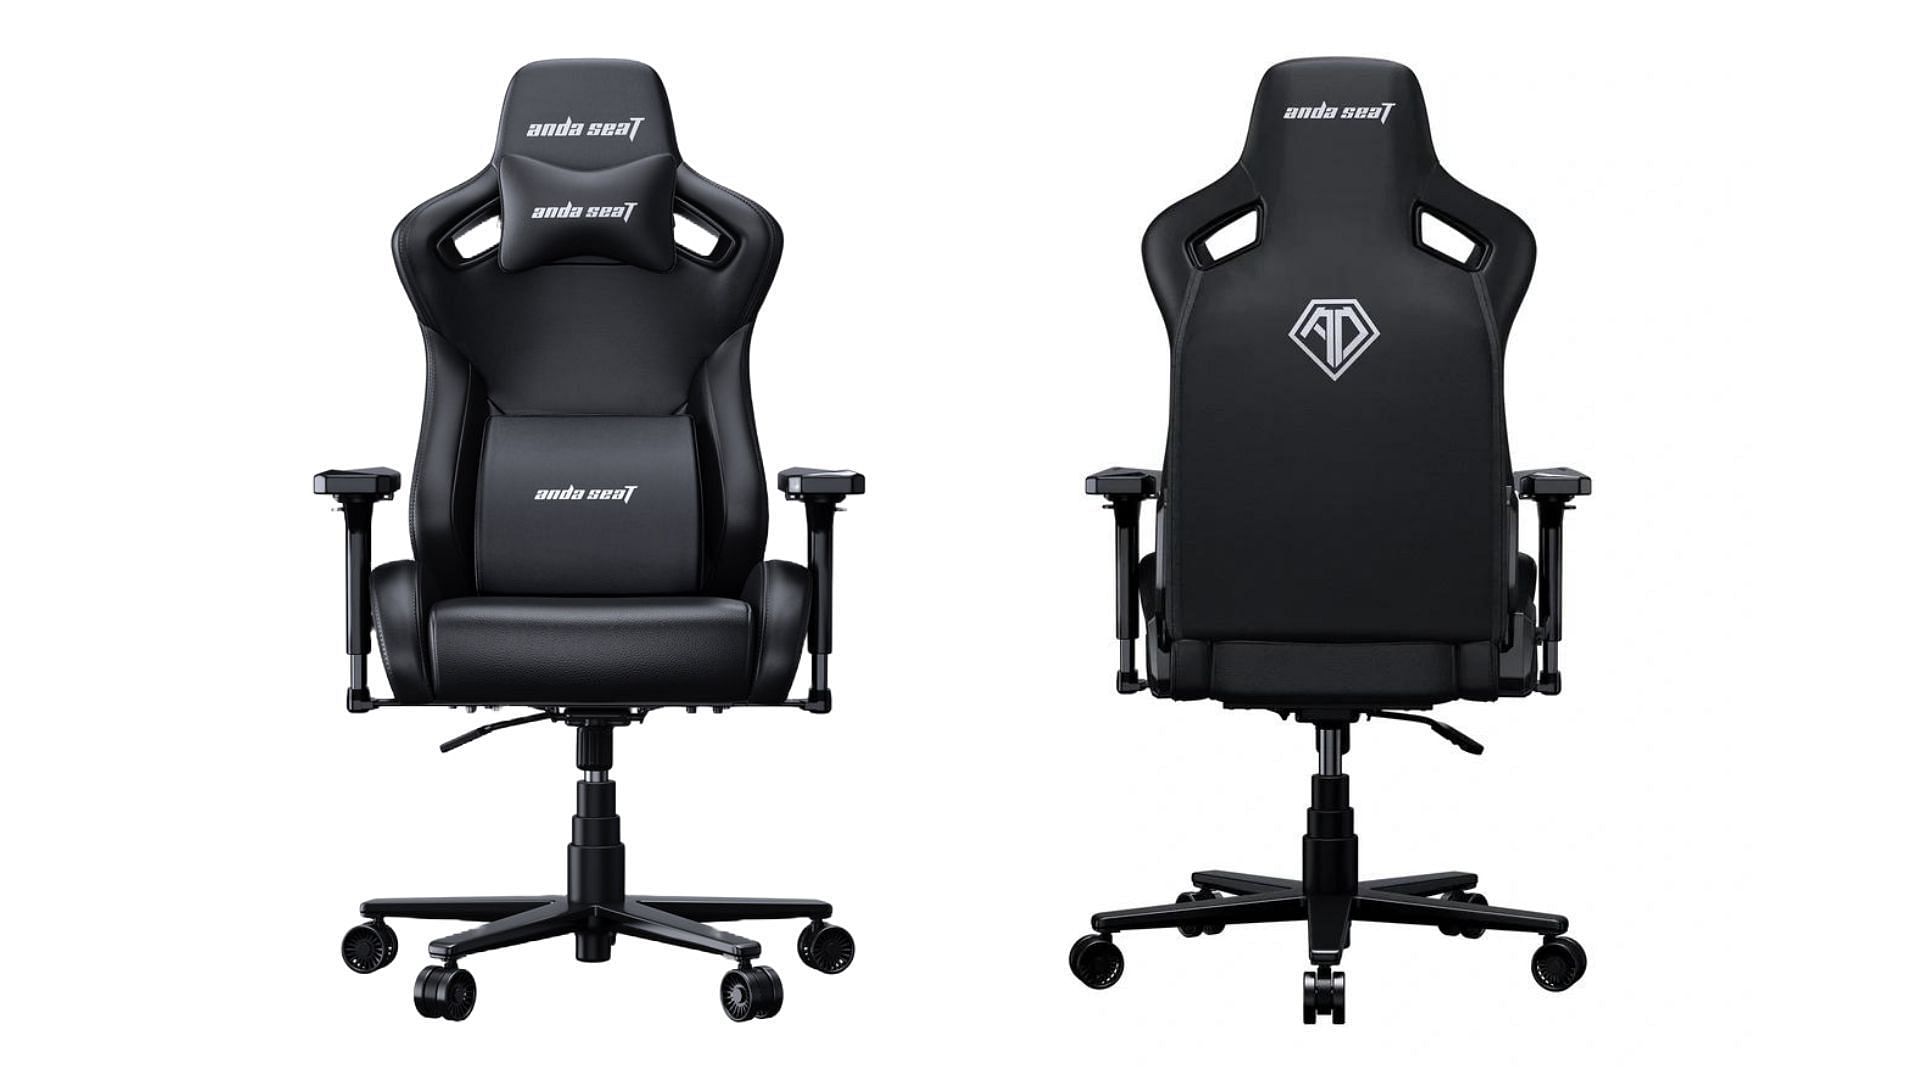 AndaSeat Kaiser Frontier Series XL - best gaming chairs (Image via AndaSeat)